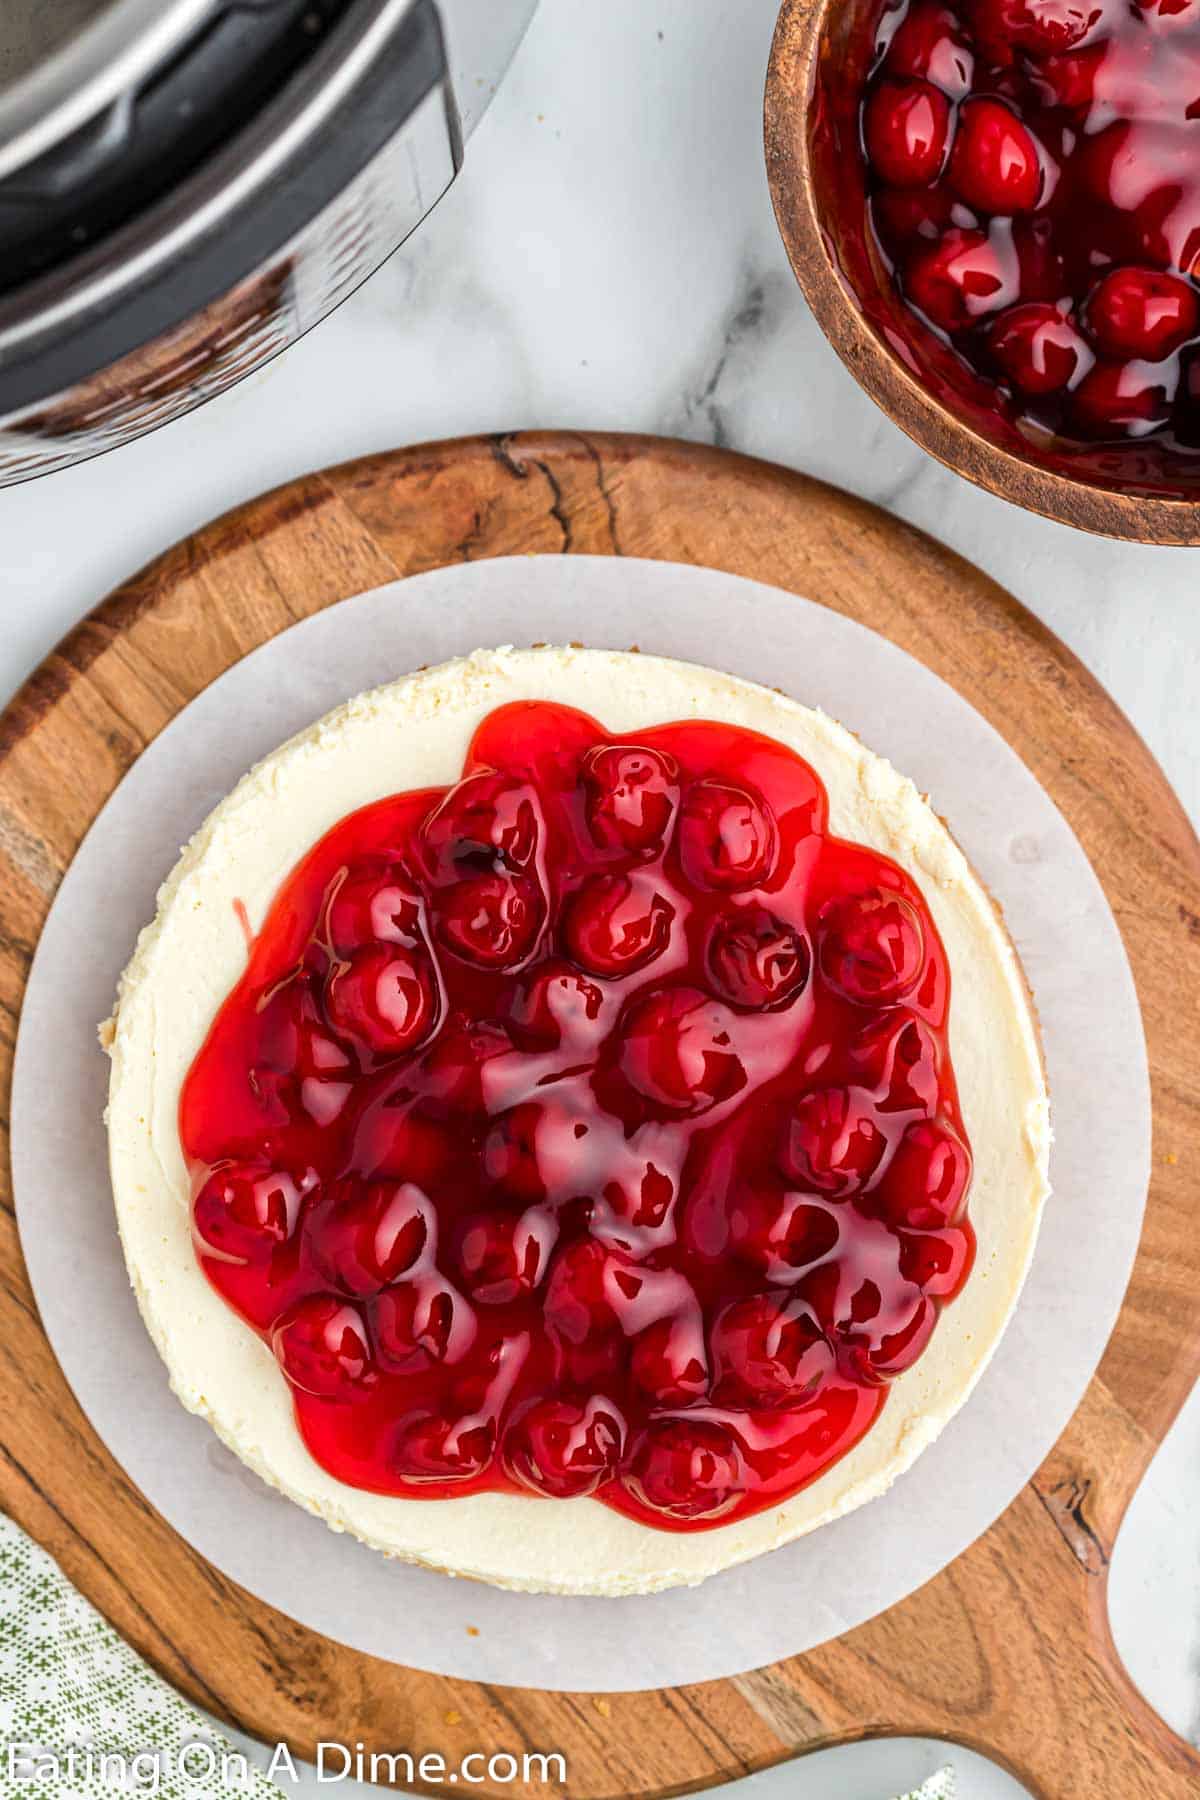 Cheesecake topped with cherries on a wooden platter